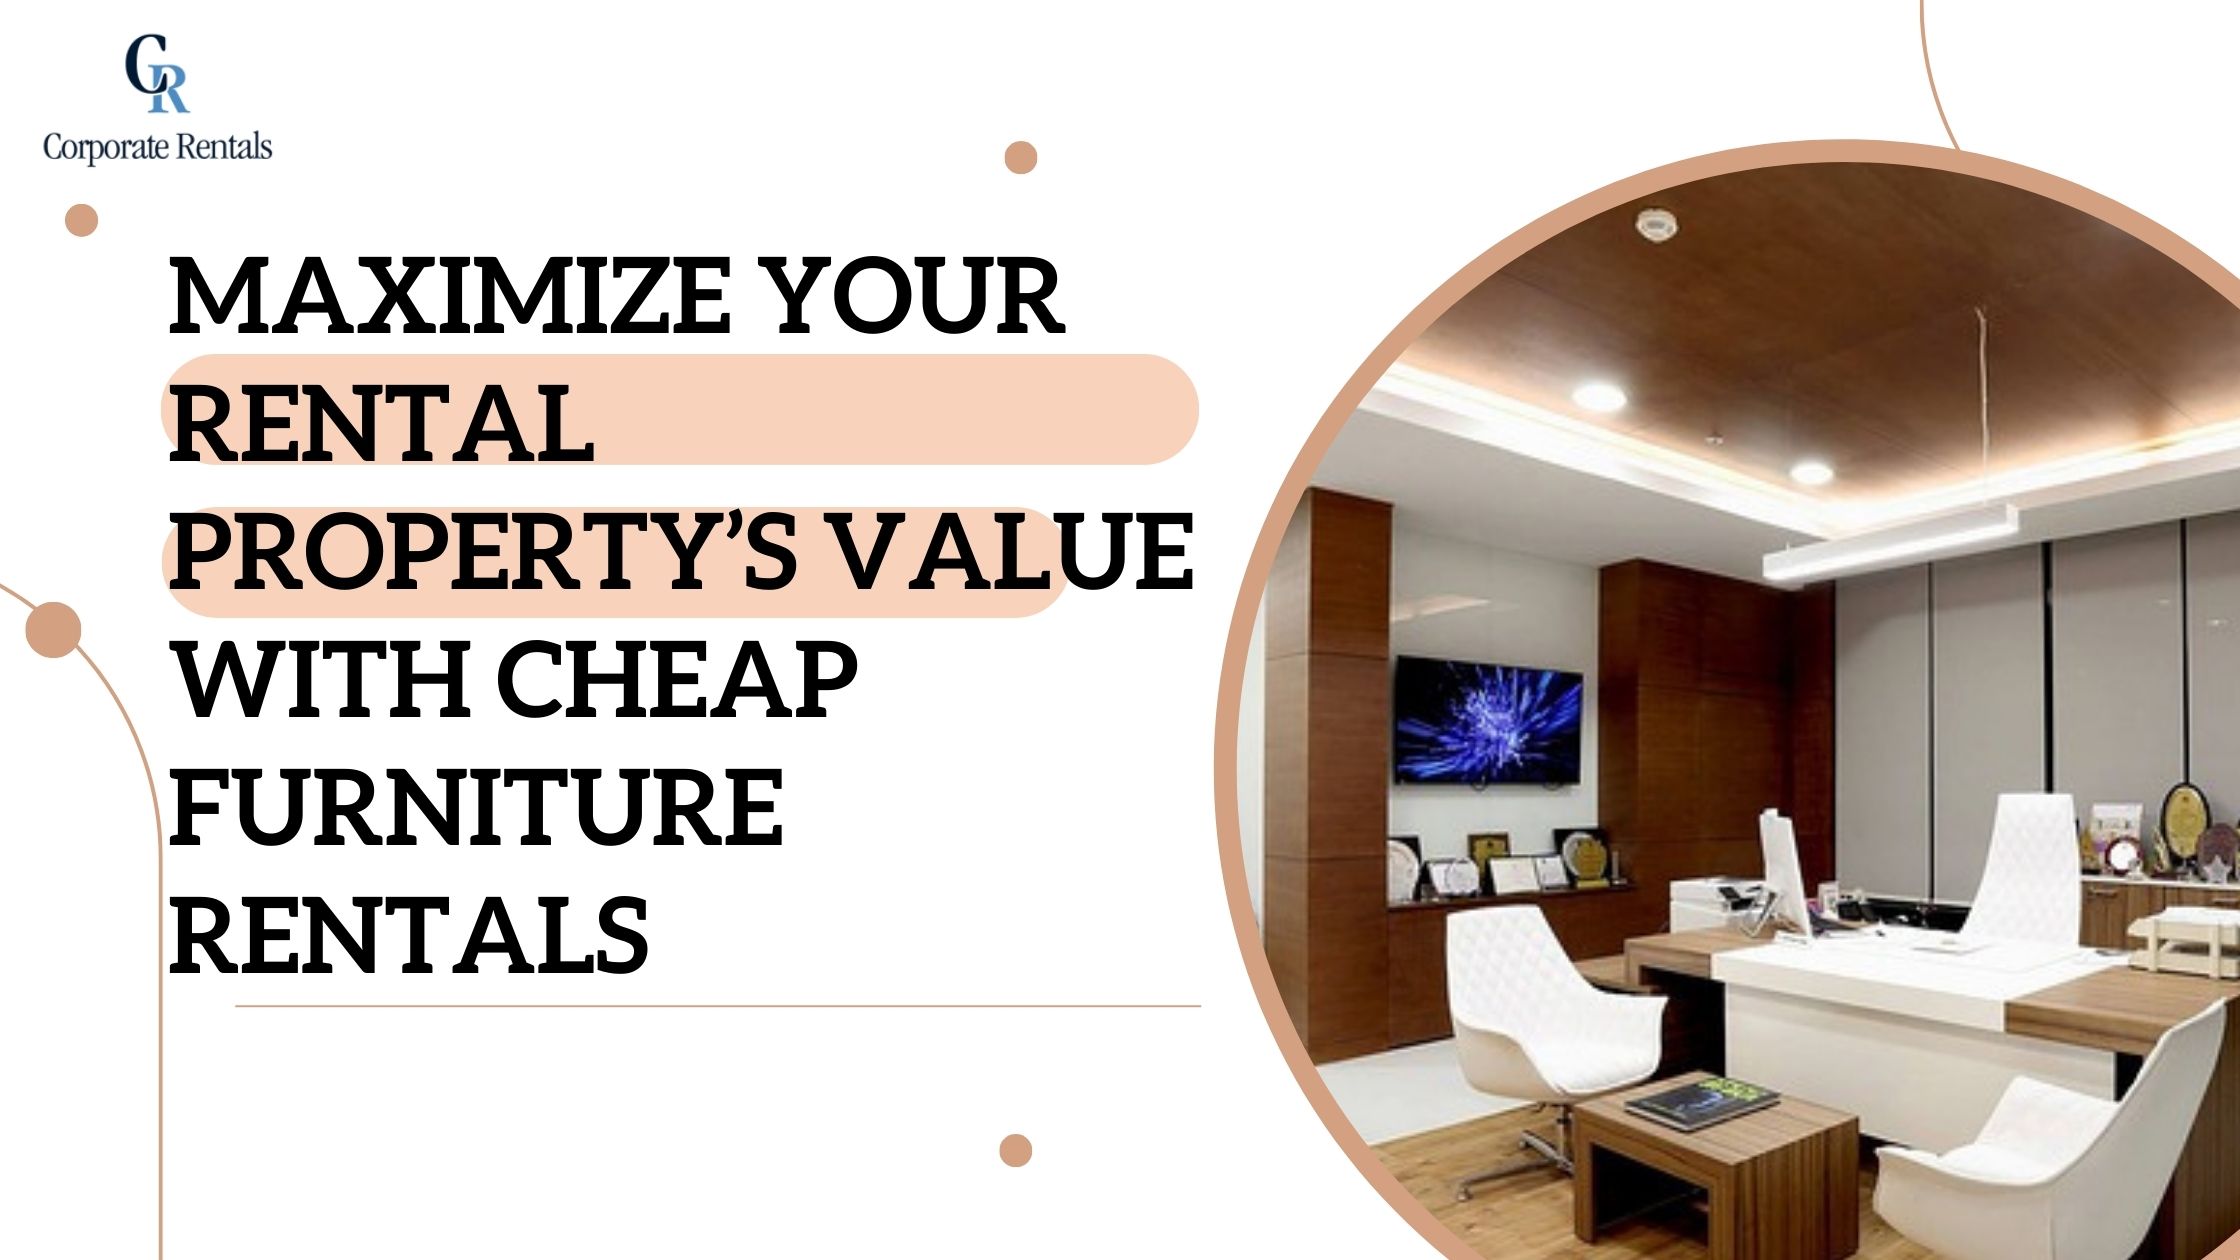 Maximize Your Rental Property’s Value With Cheap Furniture Rentals